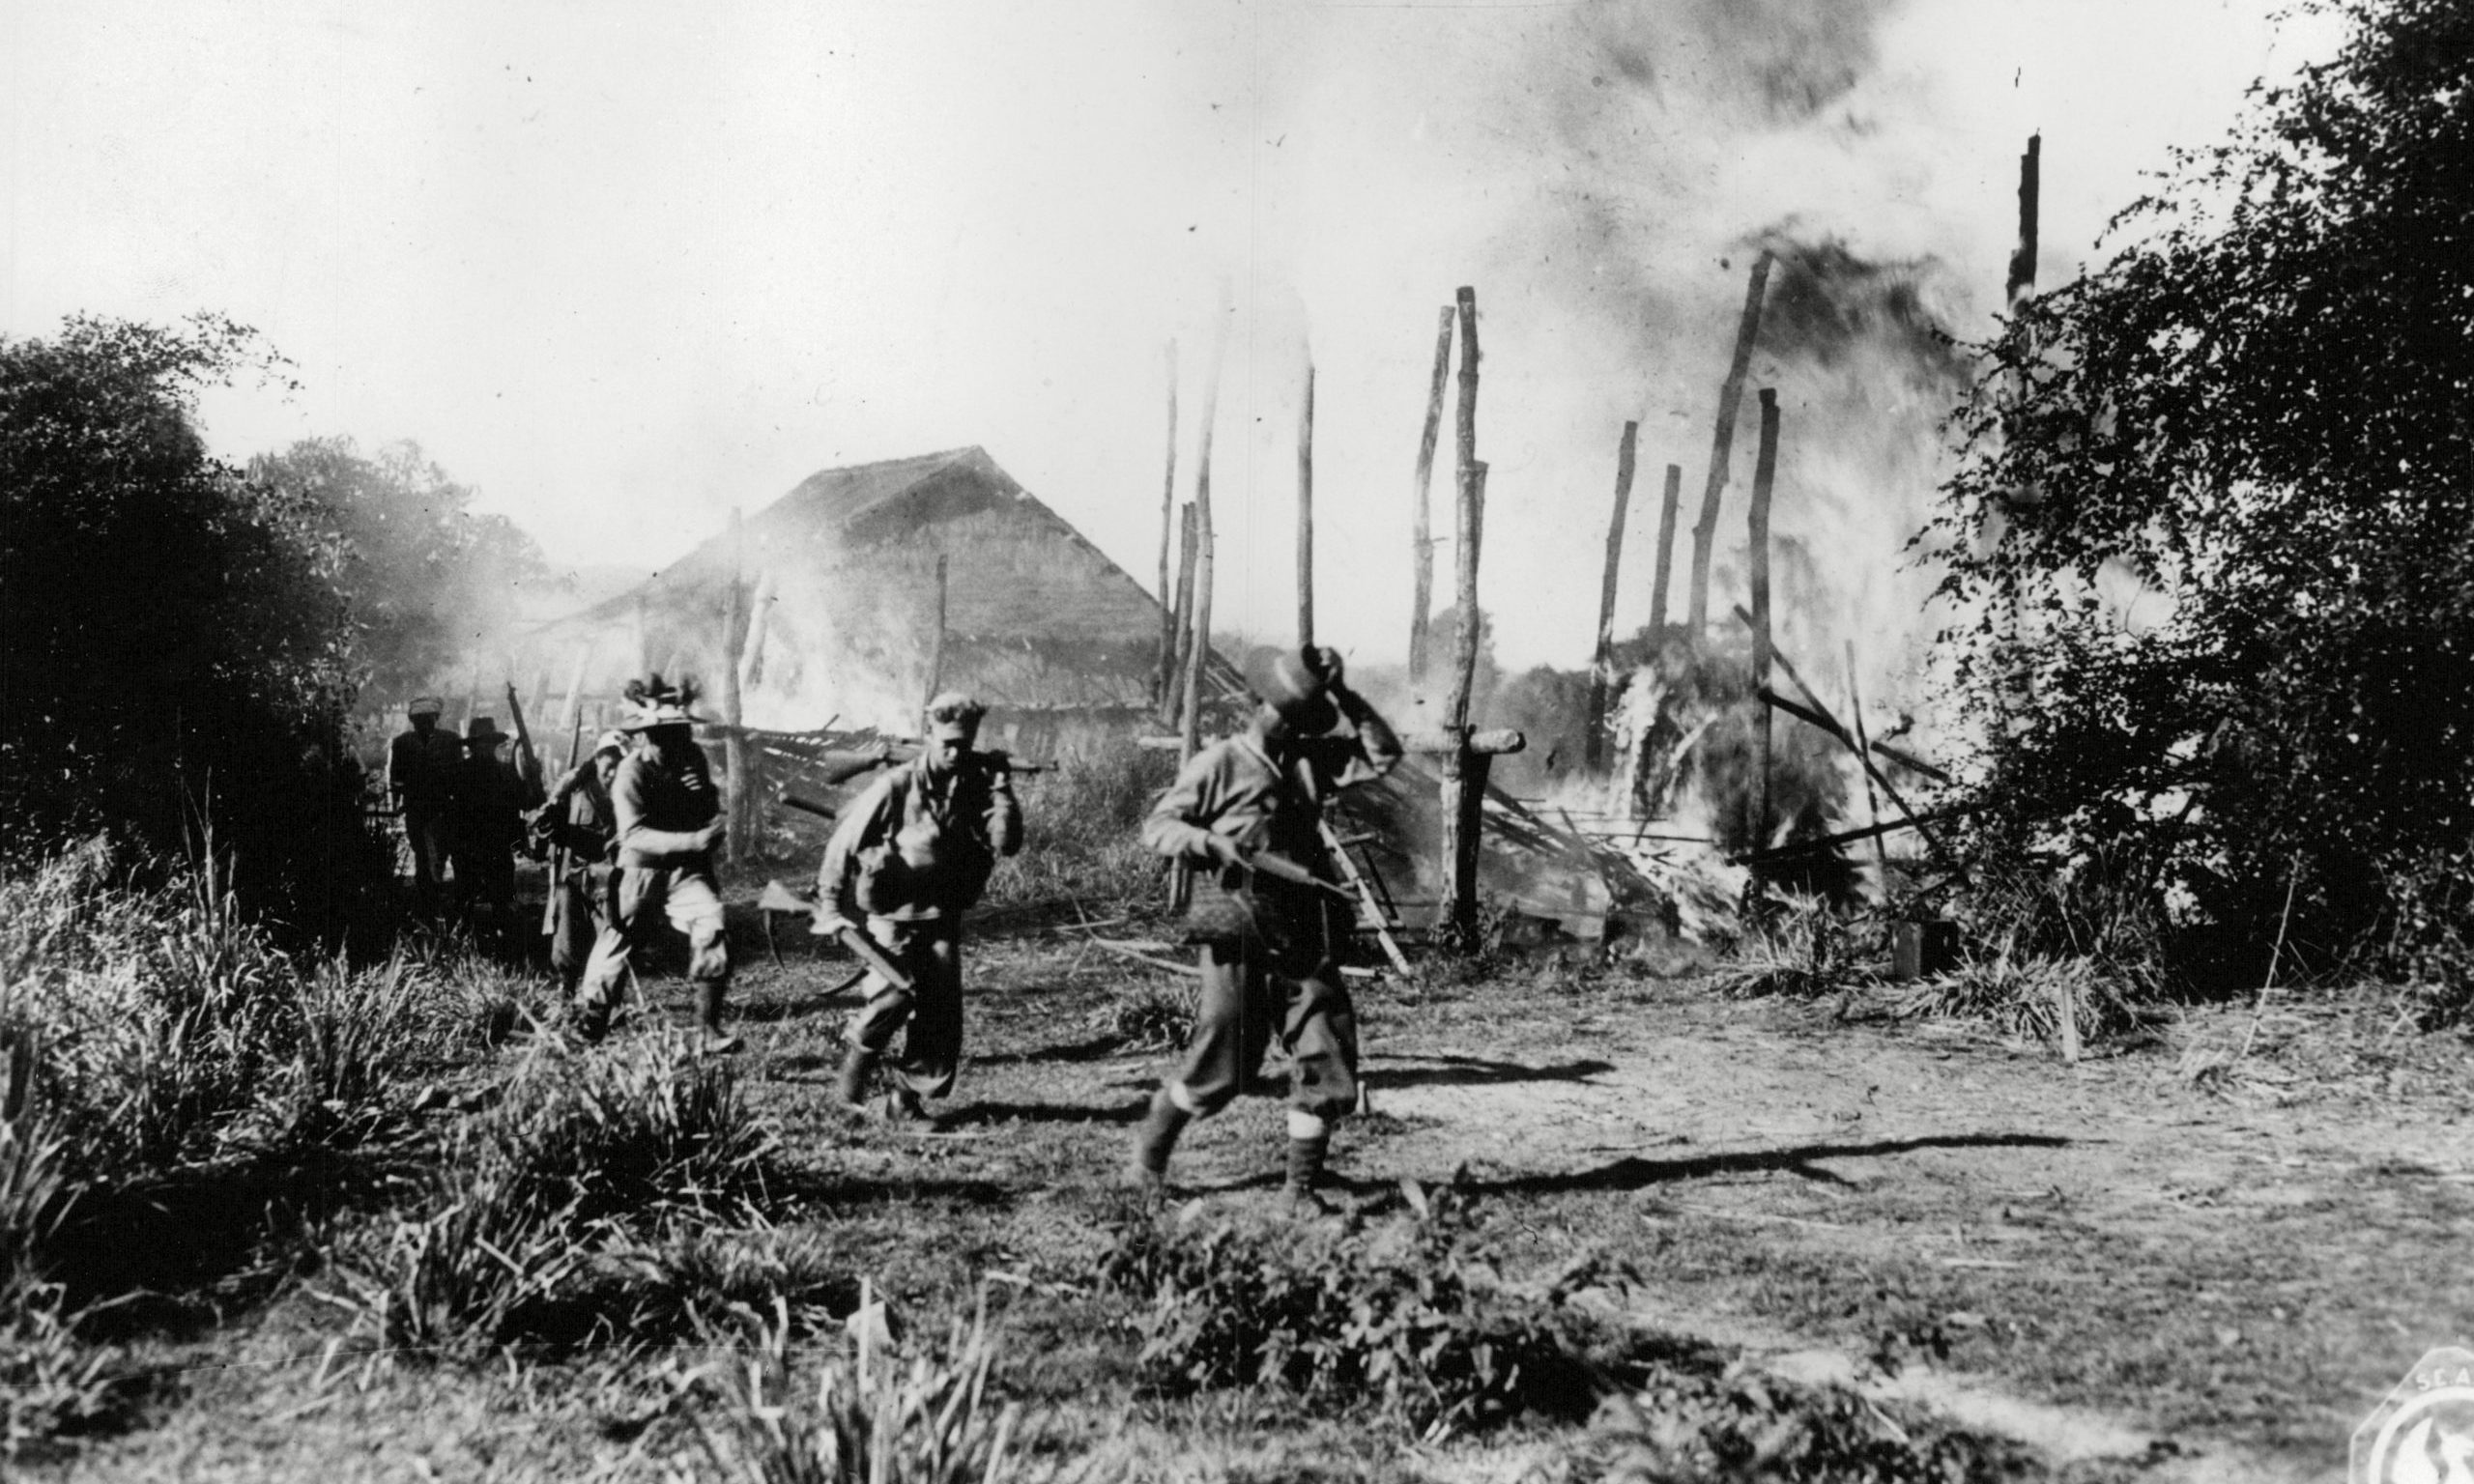 The fighting in Burma was brutal with all British servicemen severely challenged by the atrocious weather conditions in the malaria-ridden jungle.